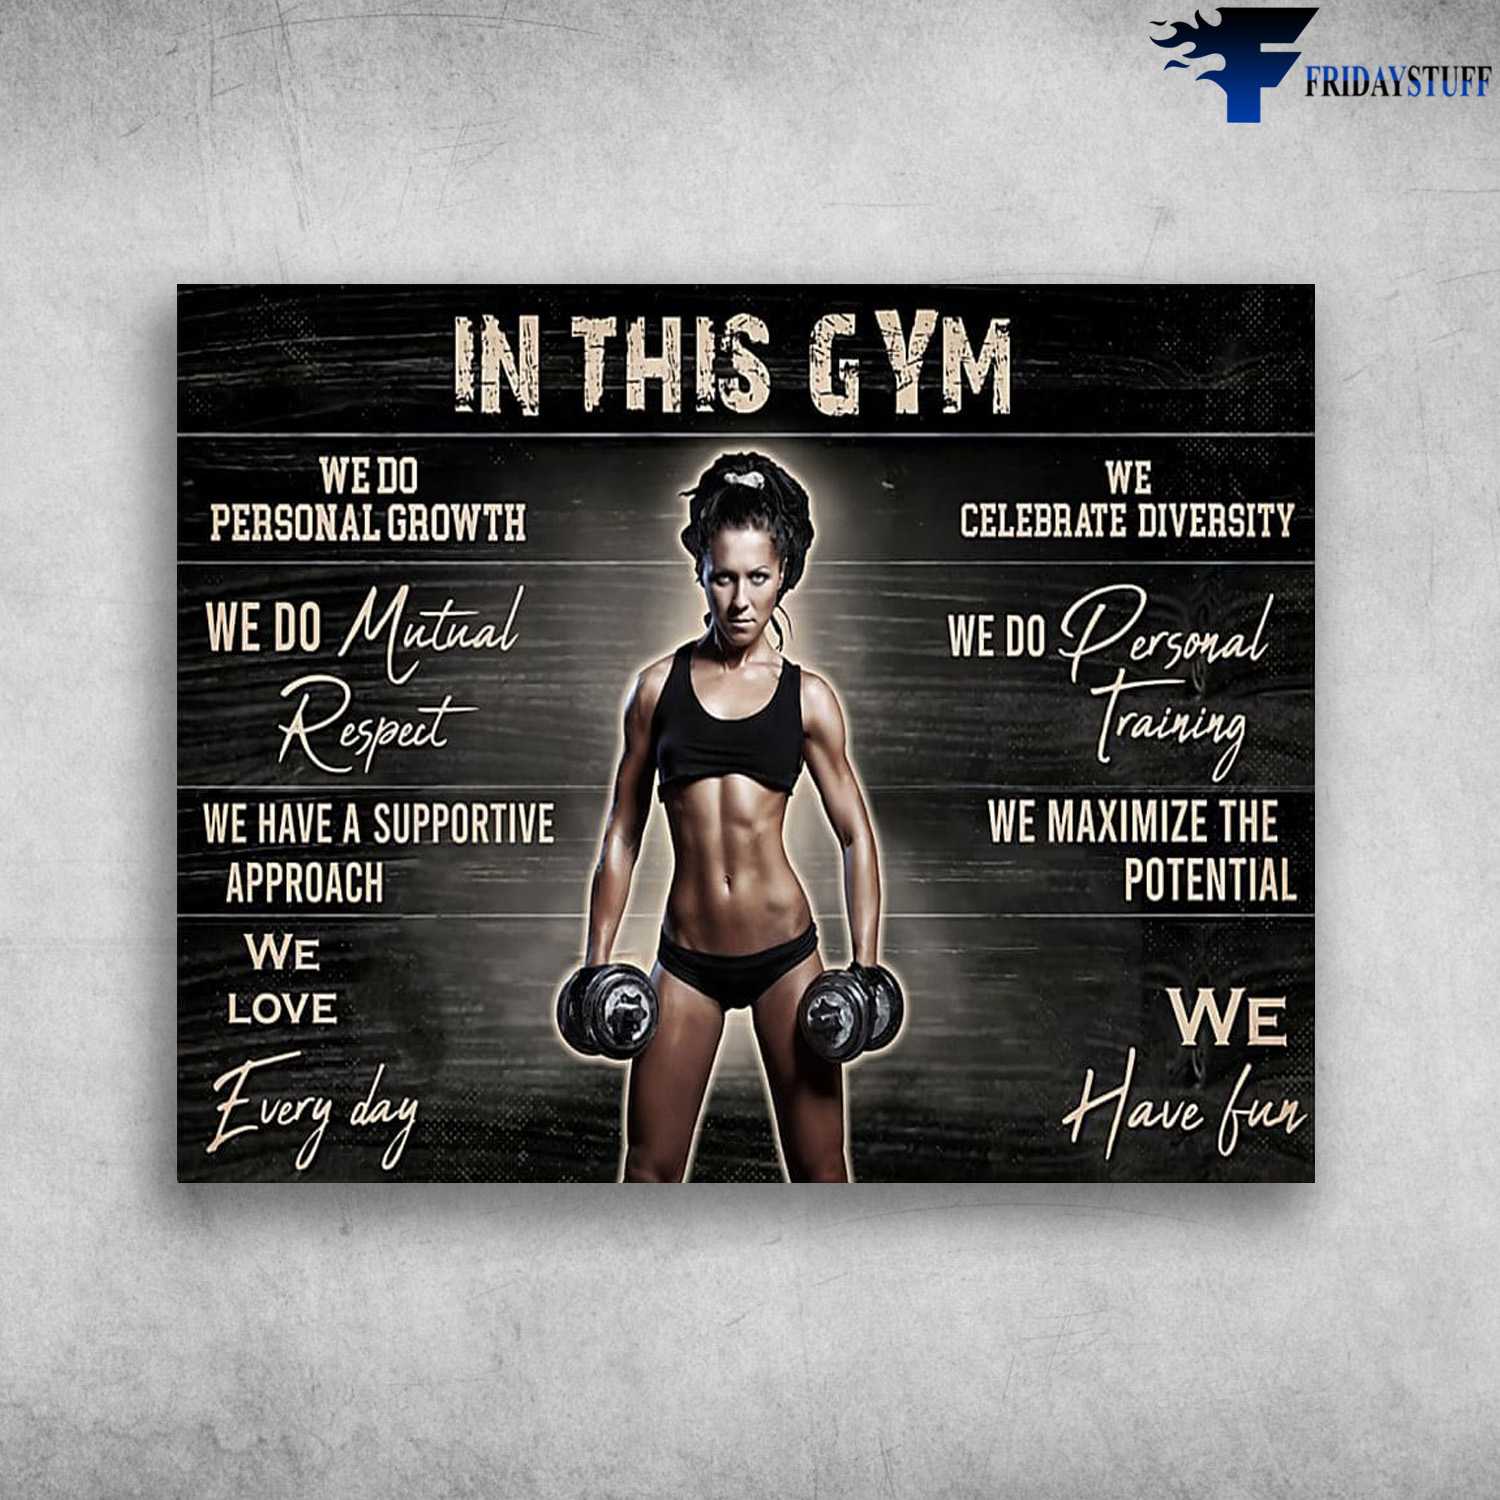 Gym Girl, Gym Poster, In This Gym, We Do Personal Growth, We Do Mutual Repect, We Have A Supportive Approach, We Love Everyday, We Celebrate Diversity